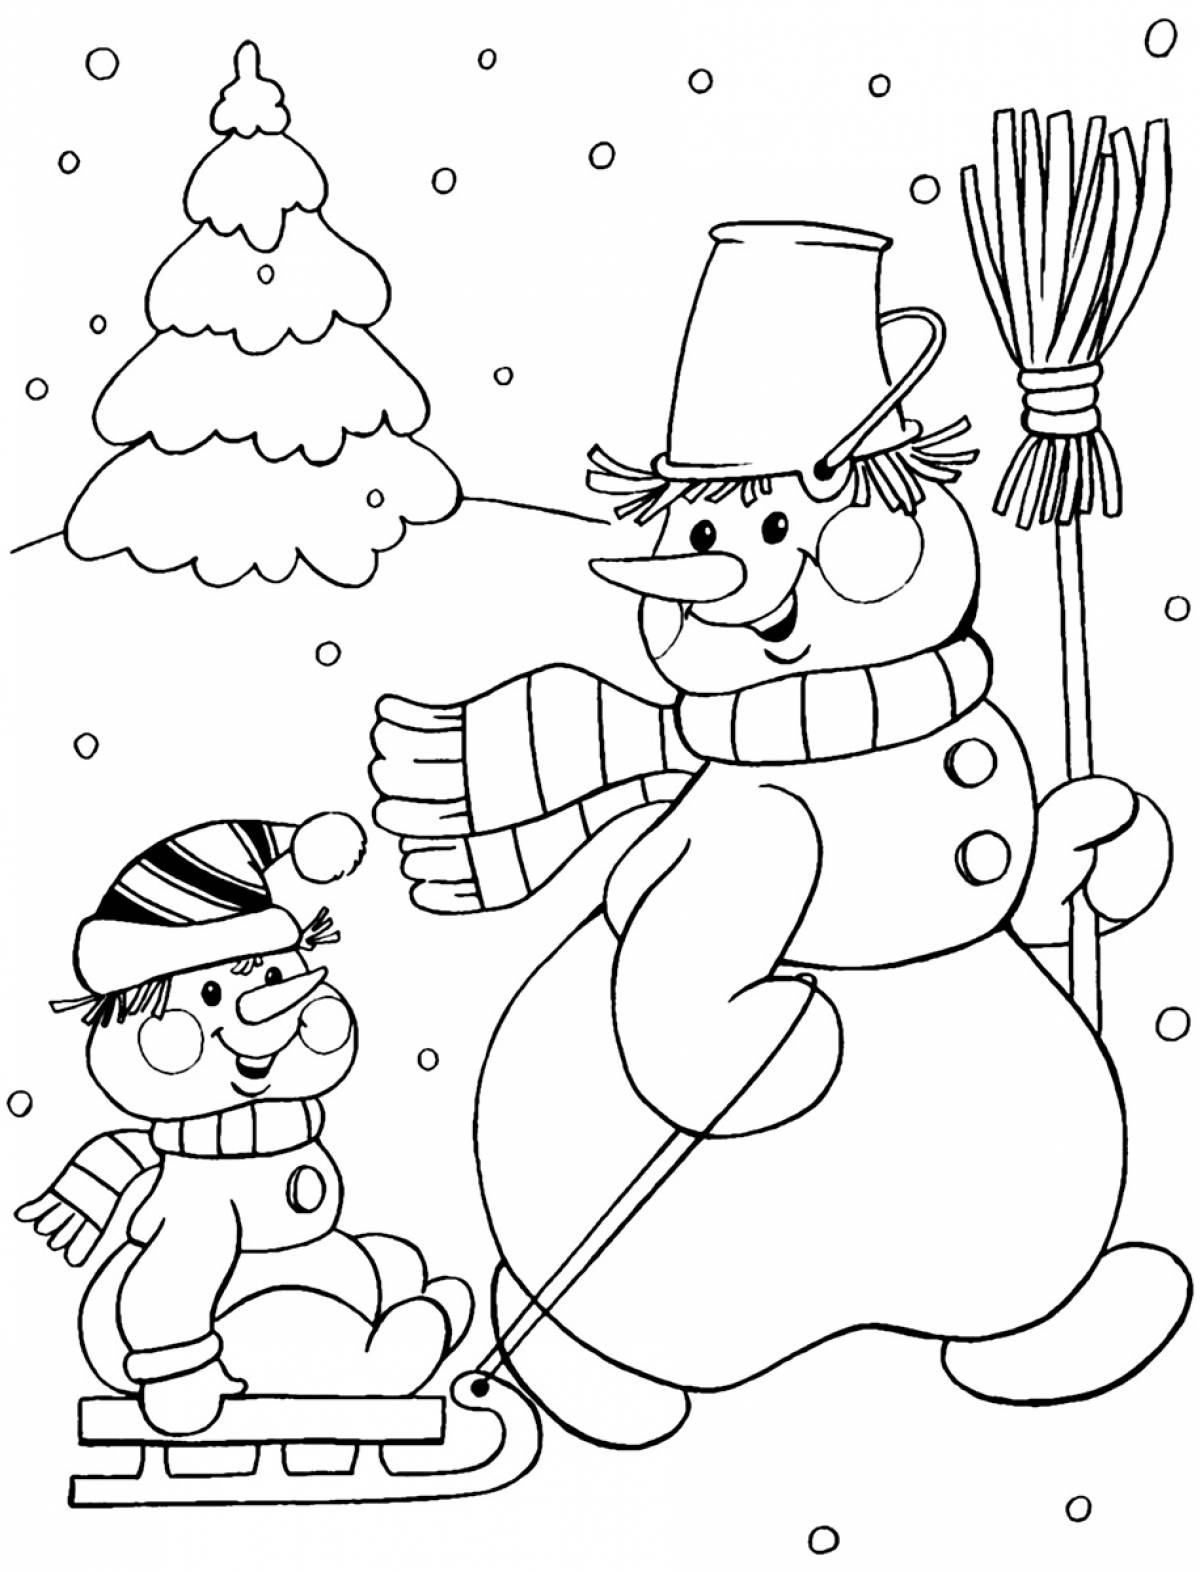 Snowman with examples #1